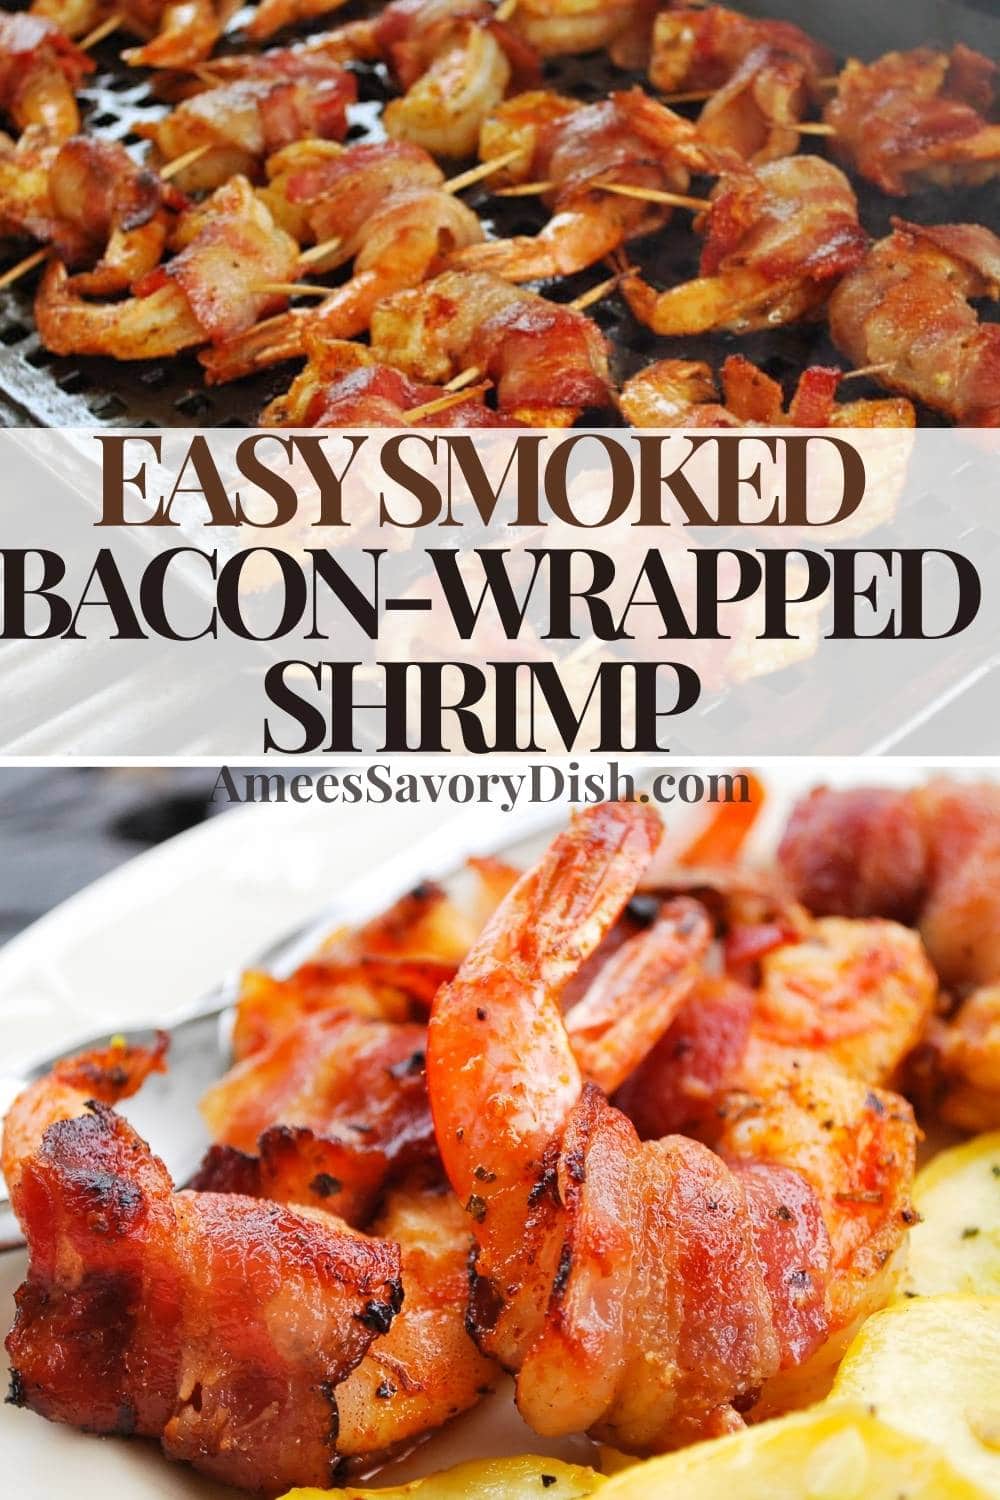 This EASY, crowd-pleasing, Smoked Bacon Wrapped Shrimp recipe showcases seasoned jumbo shrimp wrapped in bacon and smoked to perfection. via @Ameessavorydish